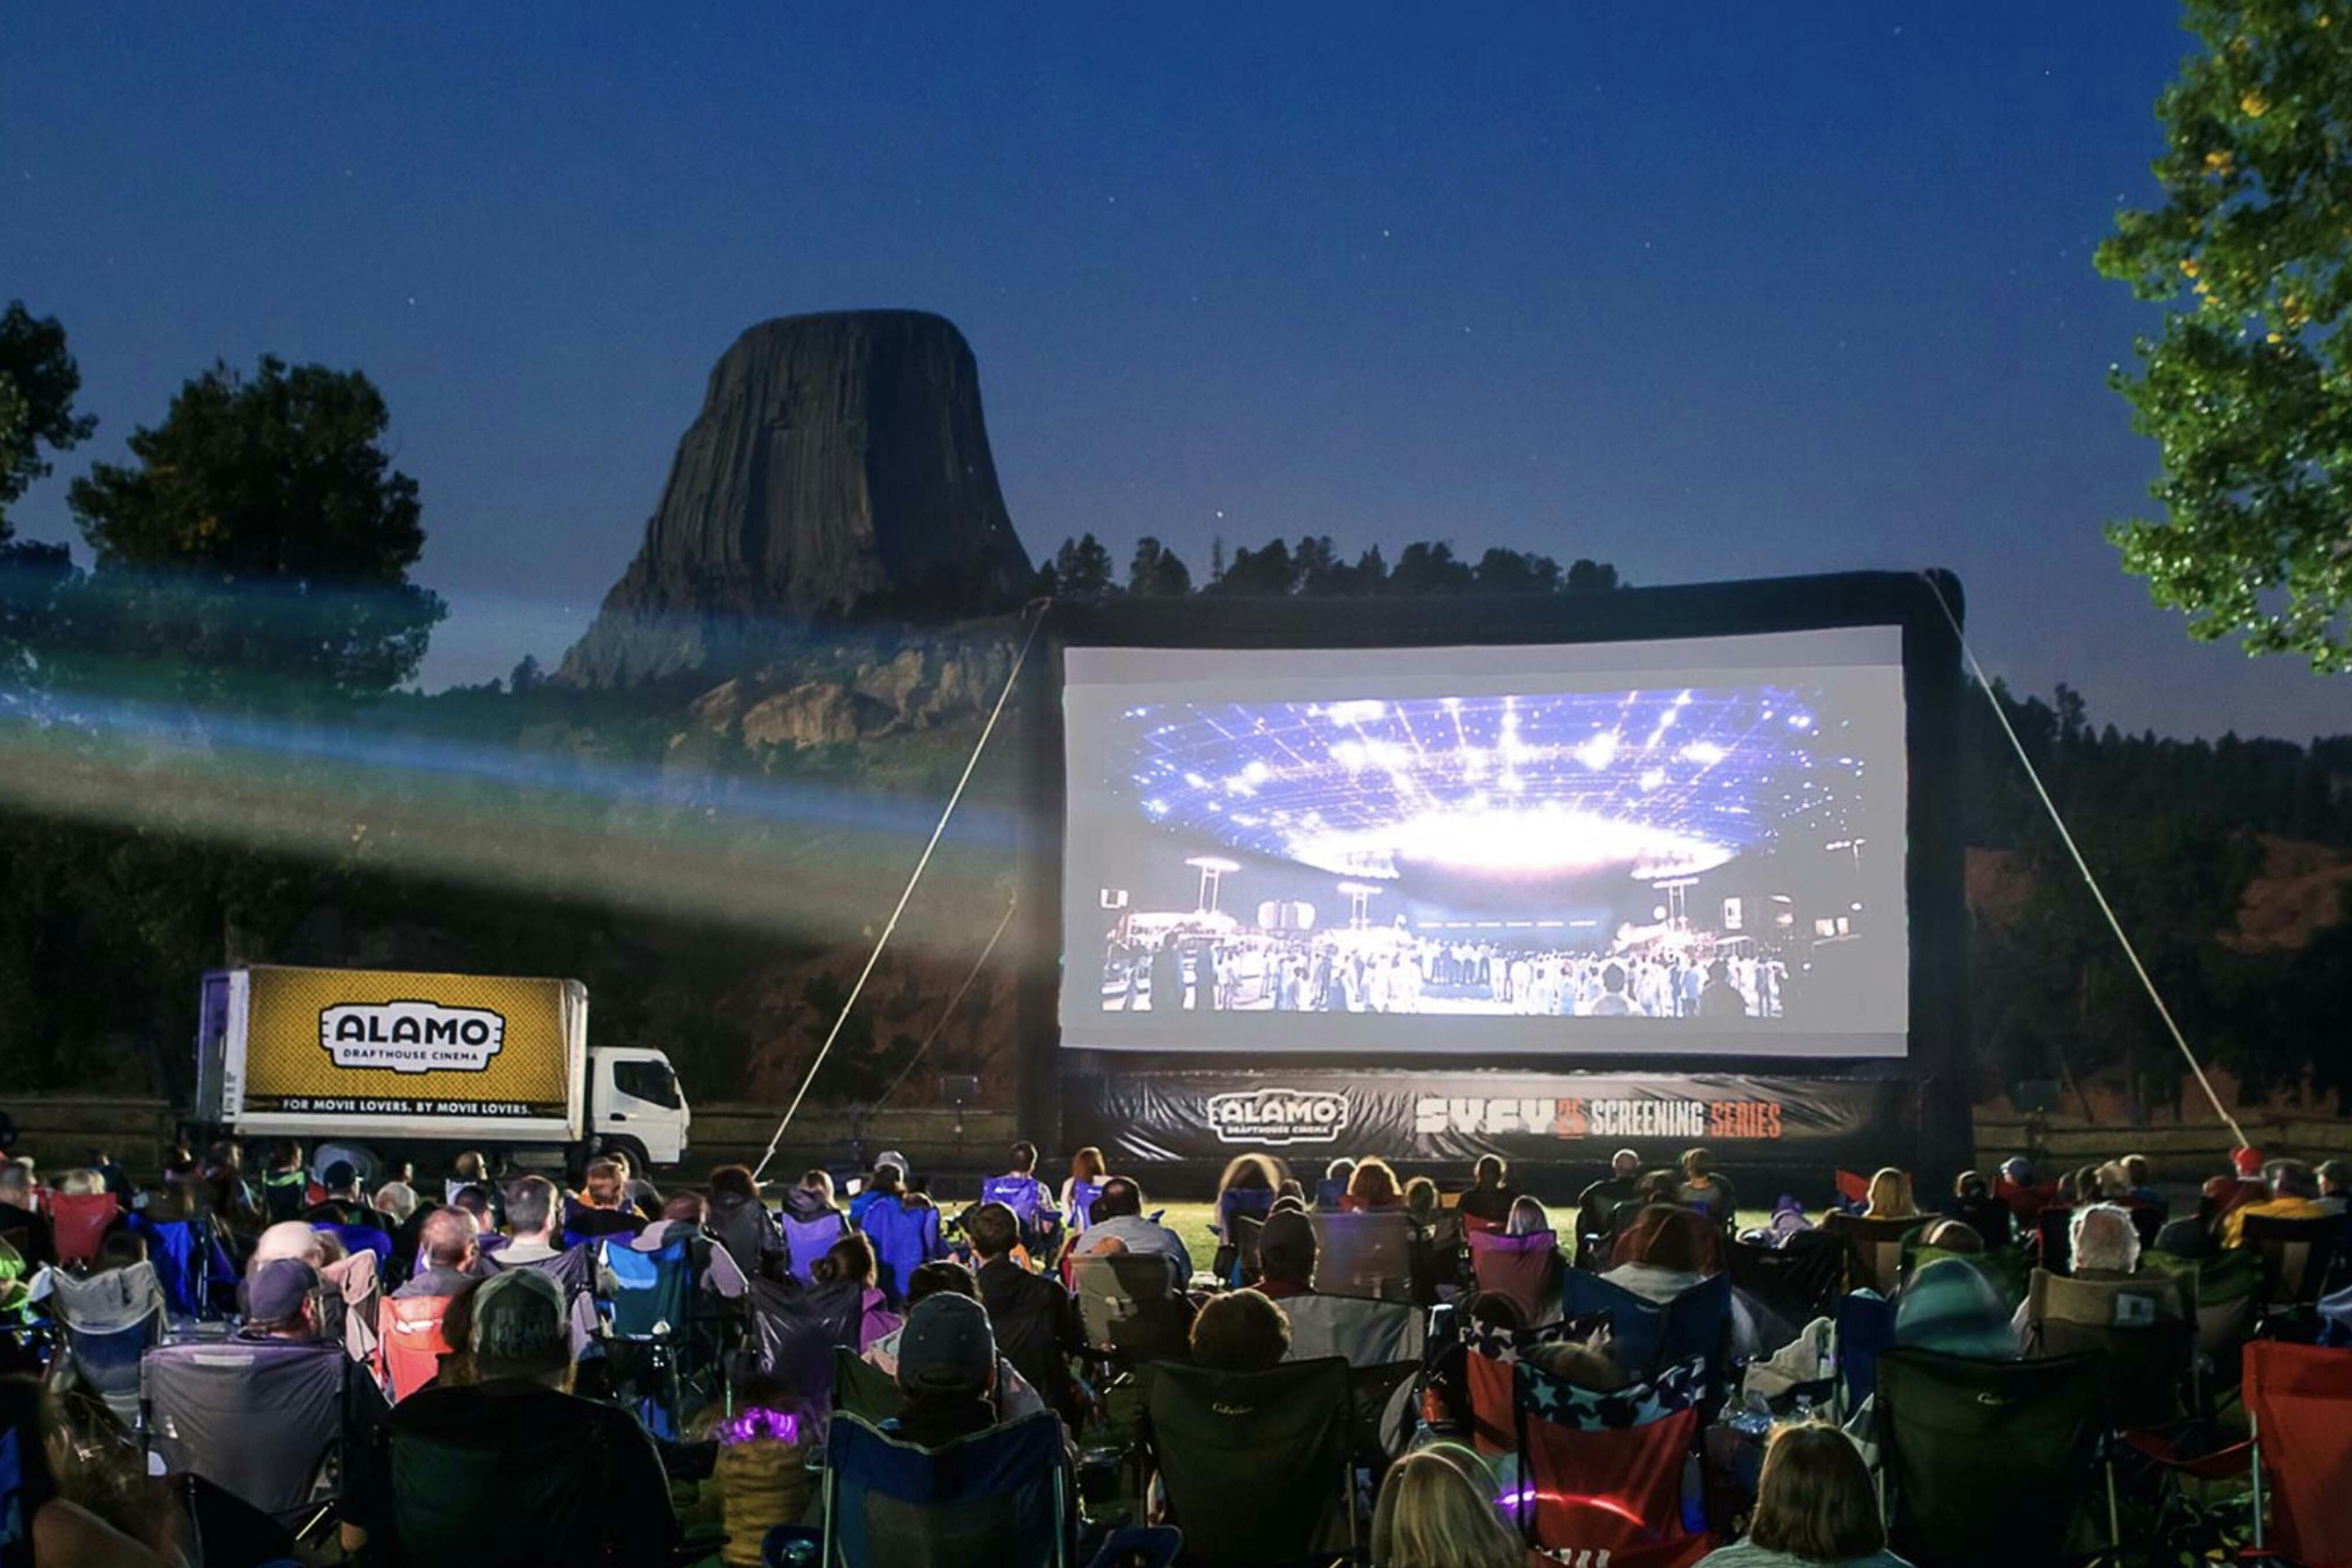 The movie Close Encounters of the Third Kind plays every night at the Devils Tower KOA Campground